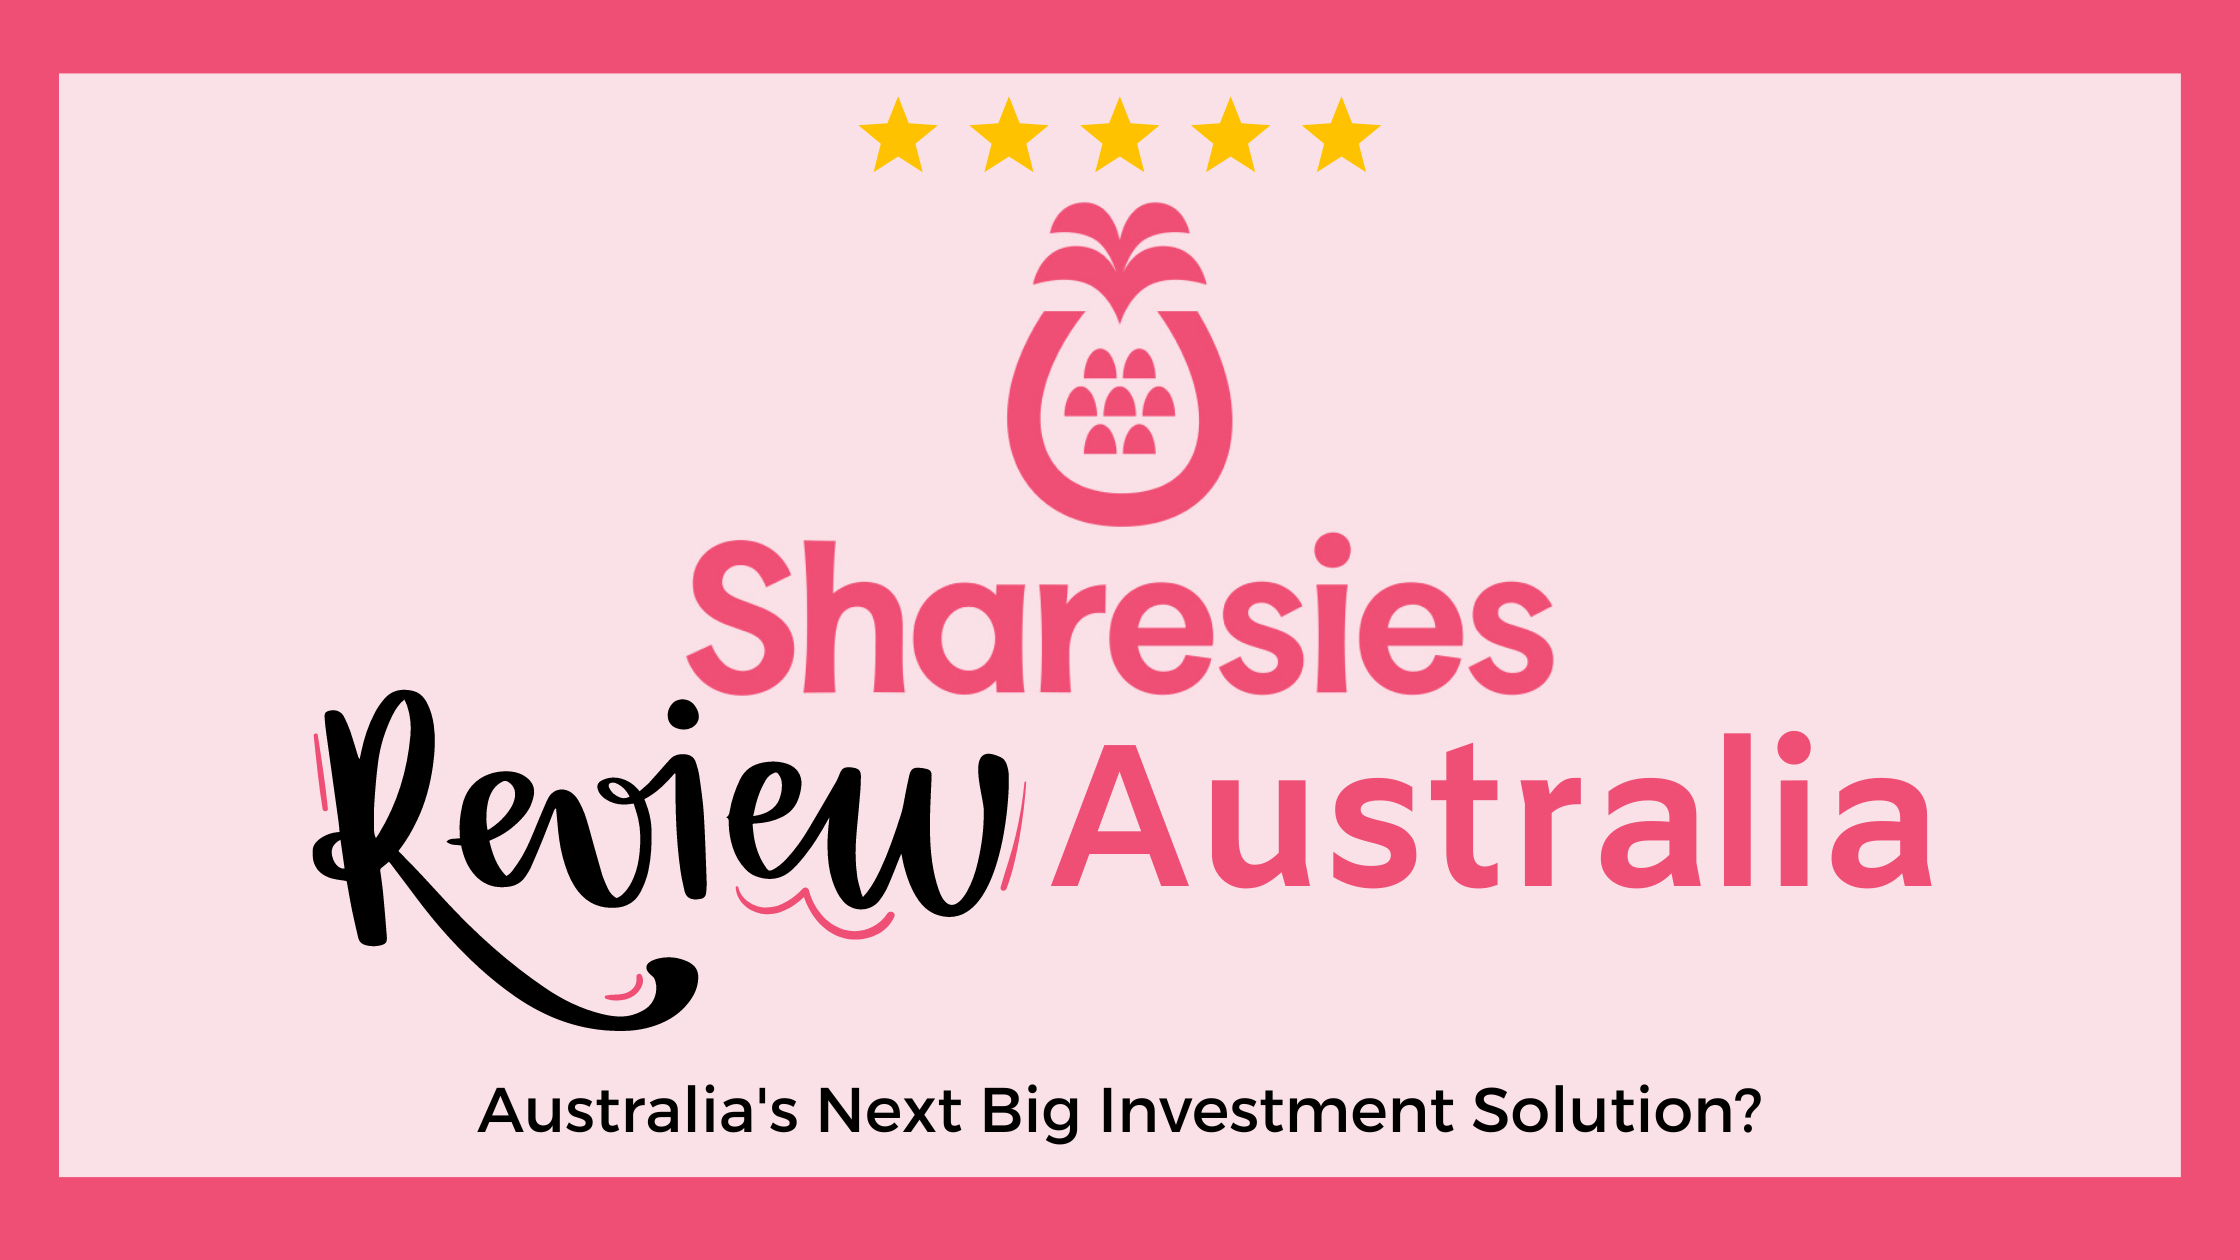 Featured image for Sharesies Review Australia: gold star rating on a light pink background with a dark pink border.